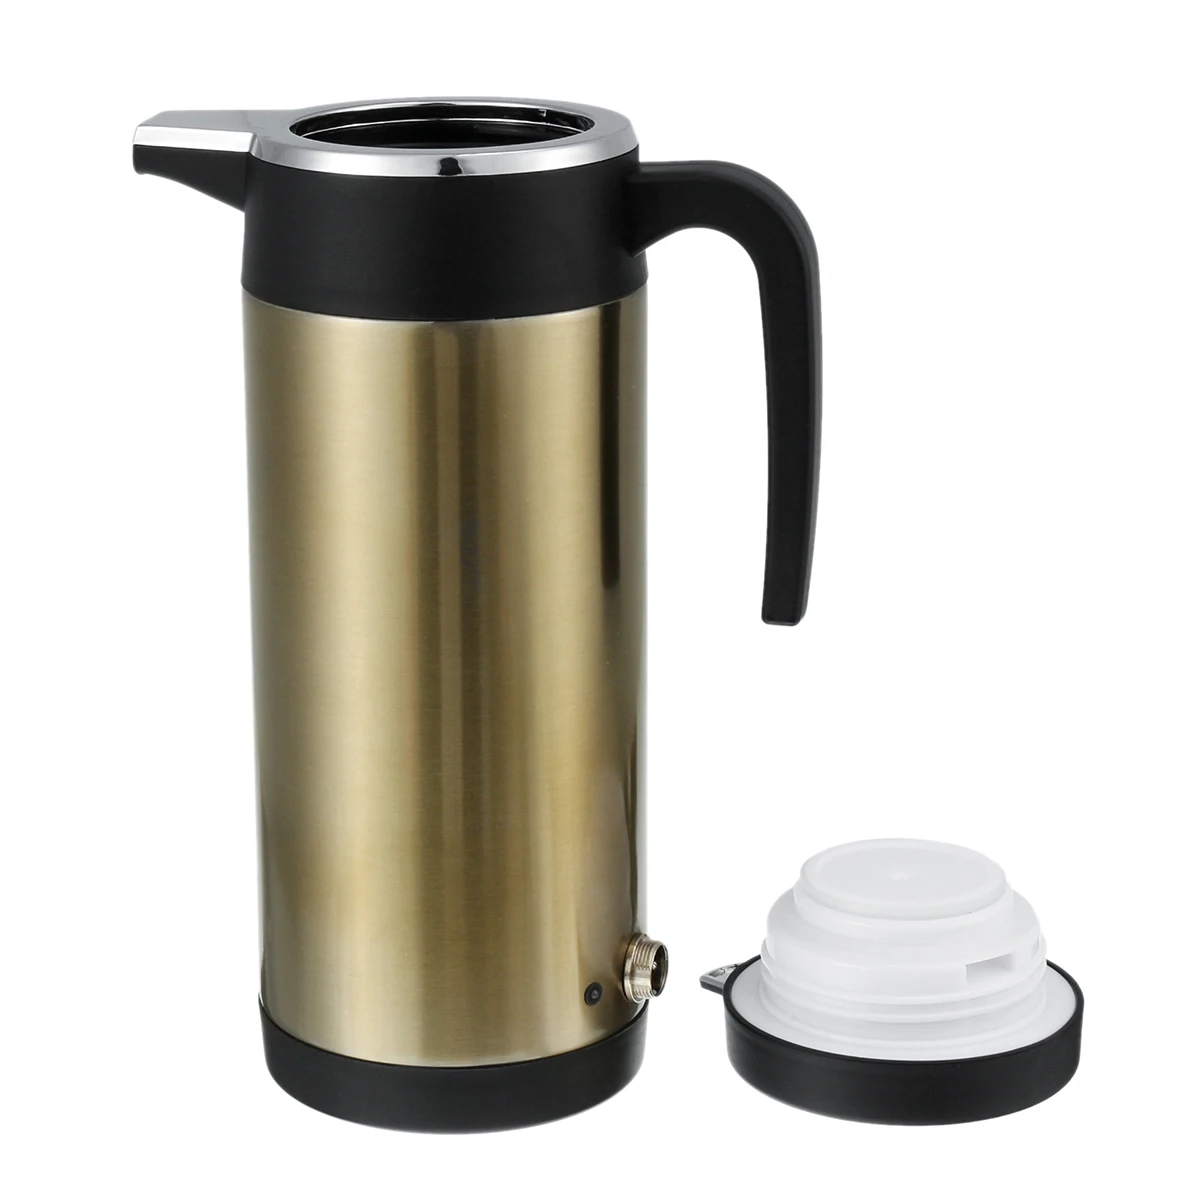 1200ml 12V Car Truck Electric Heating Cup Thermostatic Kettle Stainless Steel Auto Travel Coffee Tea Boiling Mug Vacuum Flask